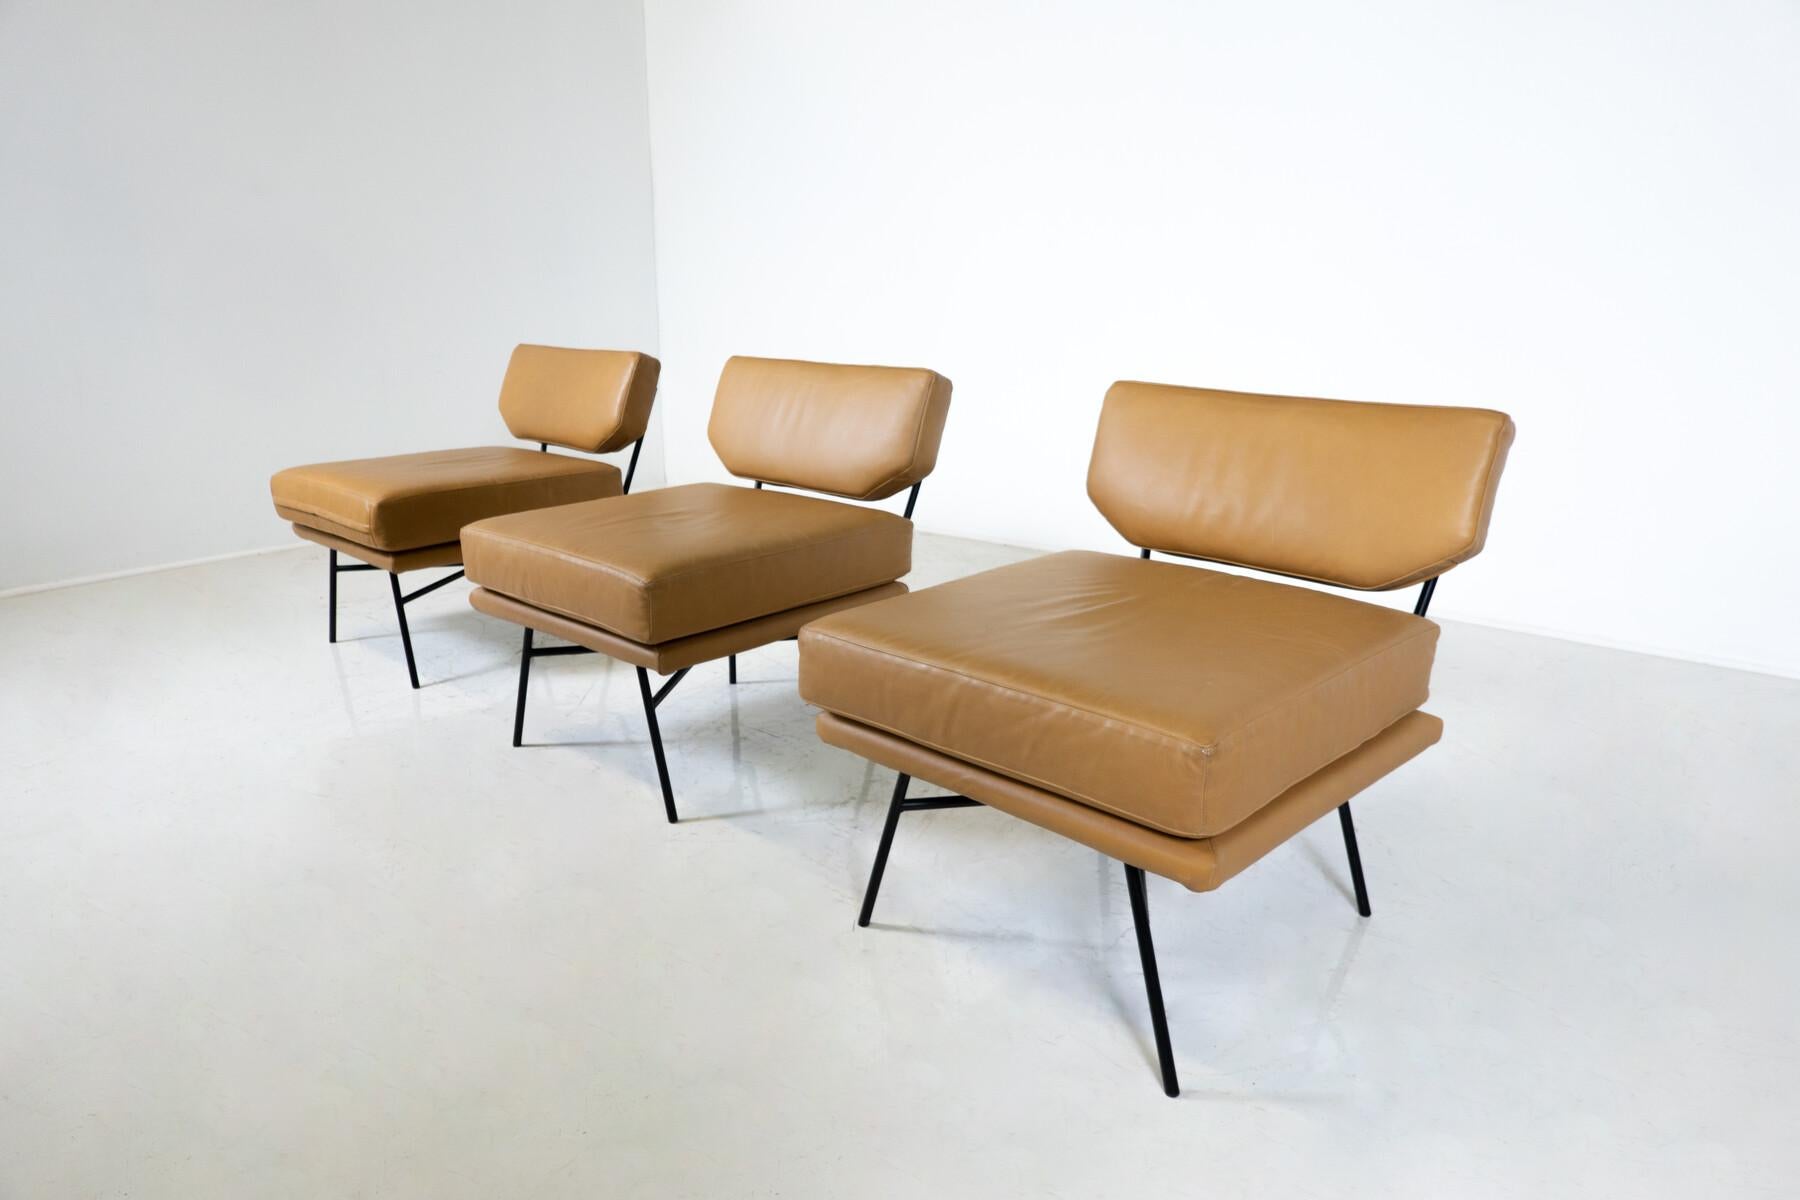 Mid-Century Modern 'Elettra' Armchair by Stdio BBPR for Arflex, Leather and Iron, 1950s - 3 available